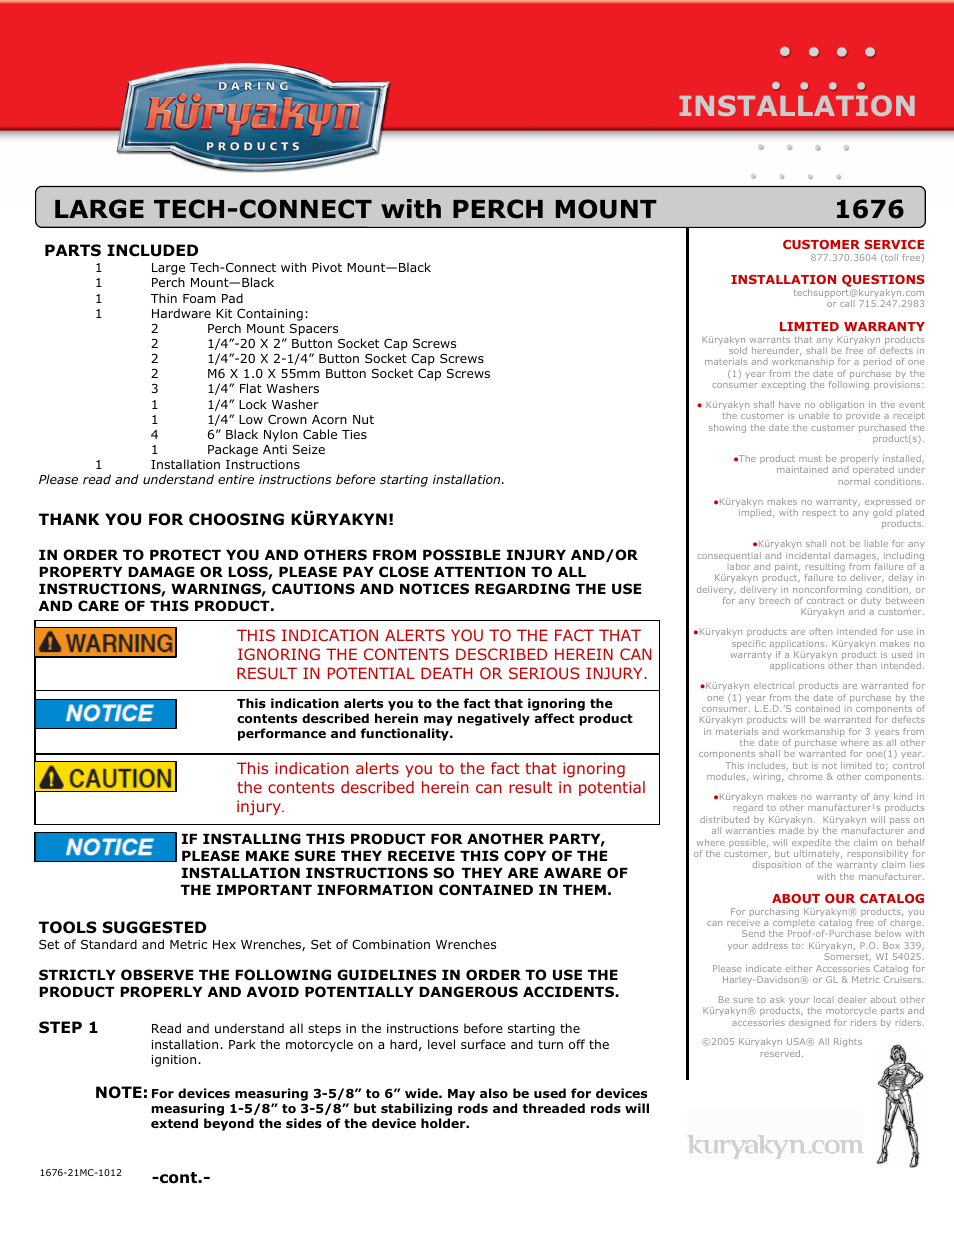 1676 LARGE TECH-CONNECT with PERCH MOUNT